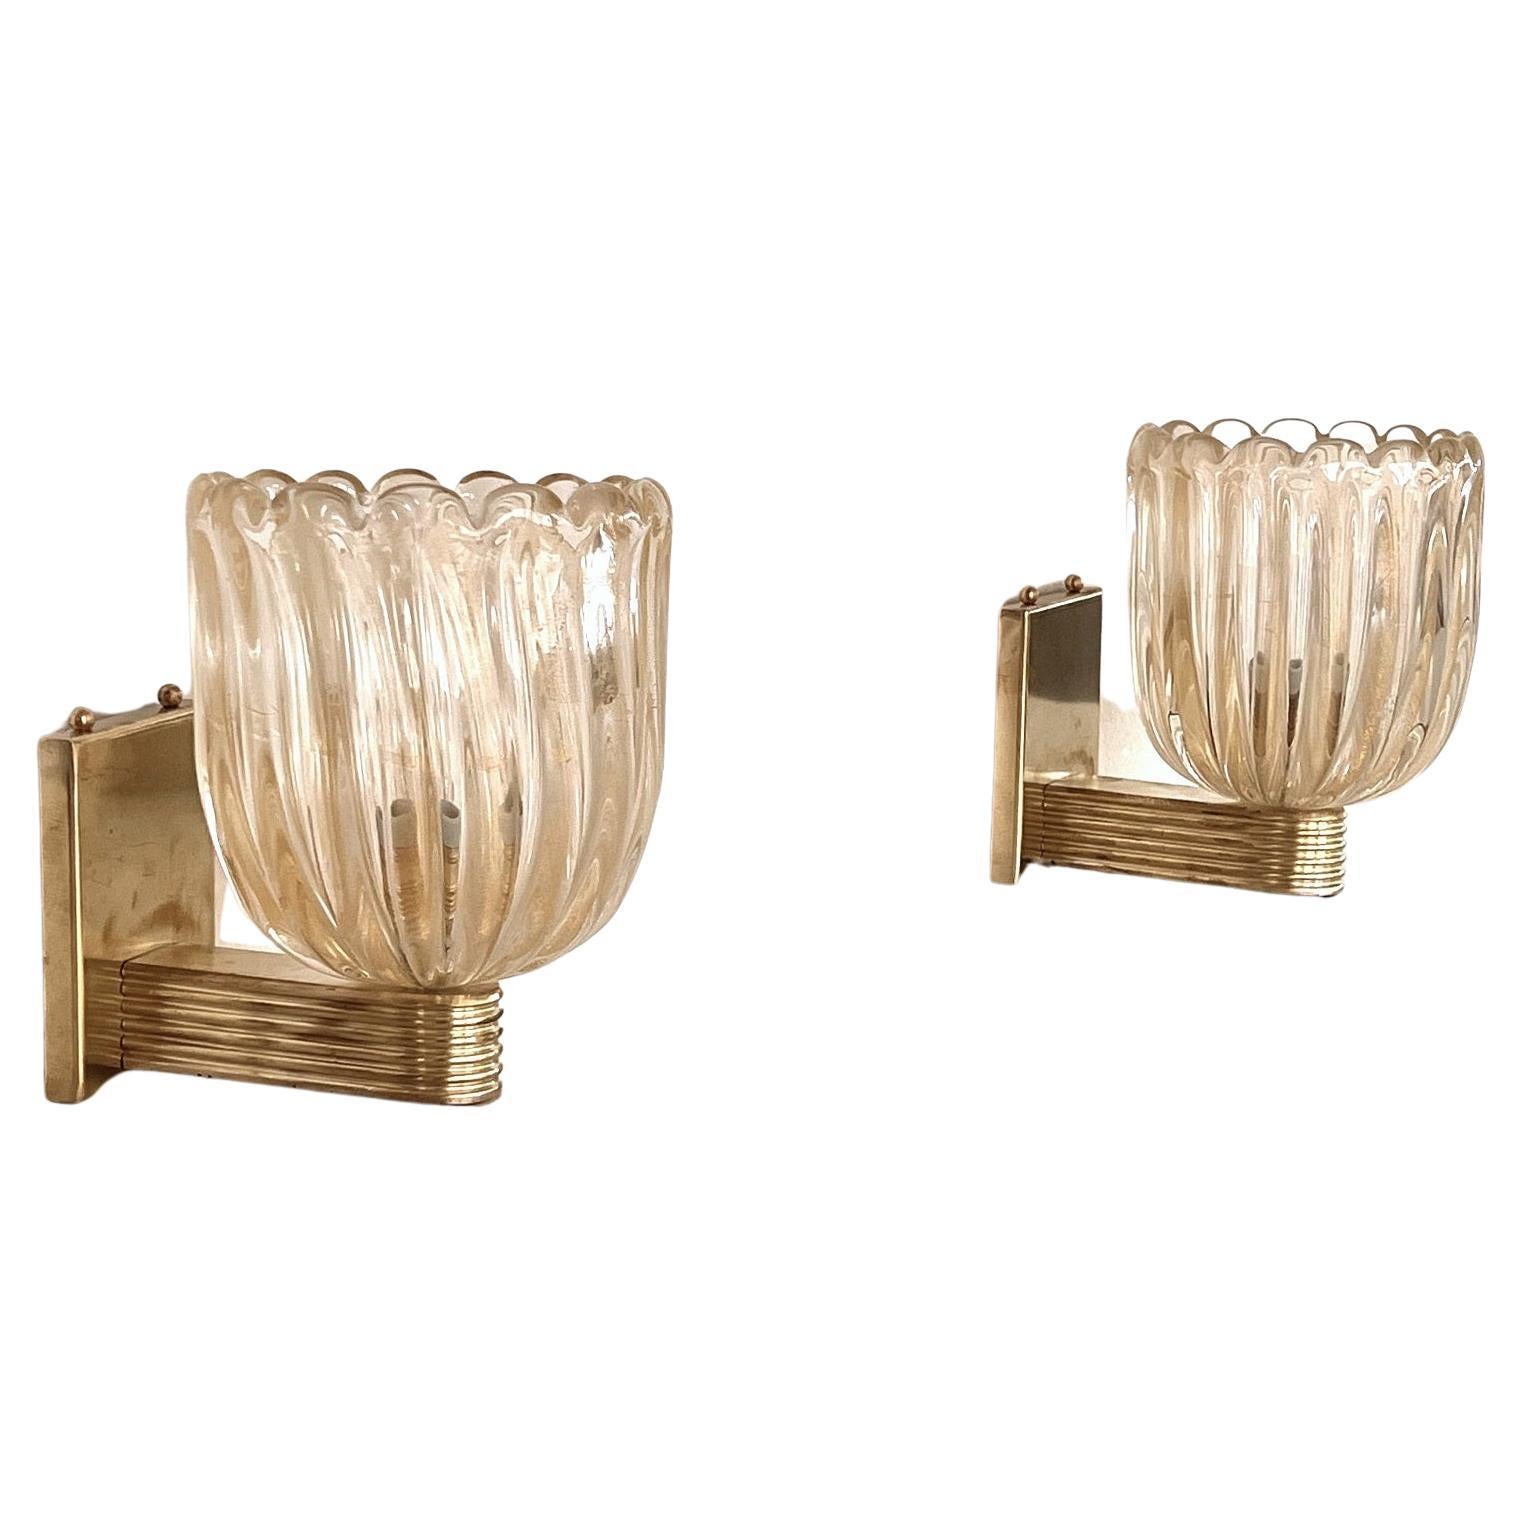 Beautiful set of two gorgeous wall lamps made of strong light amber/transparent thick Murano glasses with golden shimmer/glitter inside the glass and strong brass base. Art Deco style.
The beautiful hand-crafted glasses have a slight wave shape,